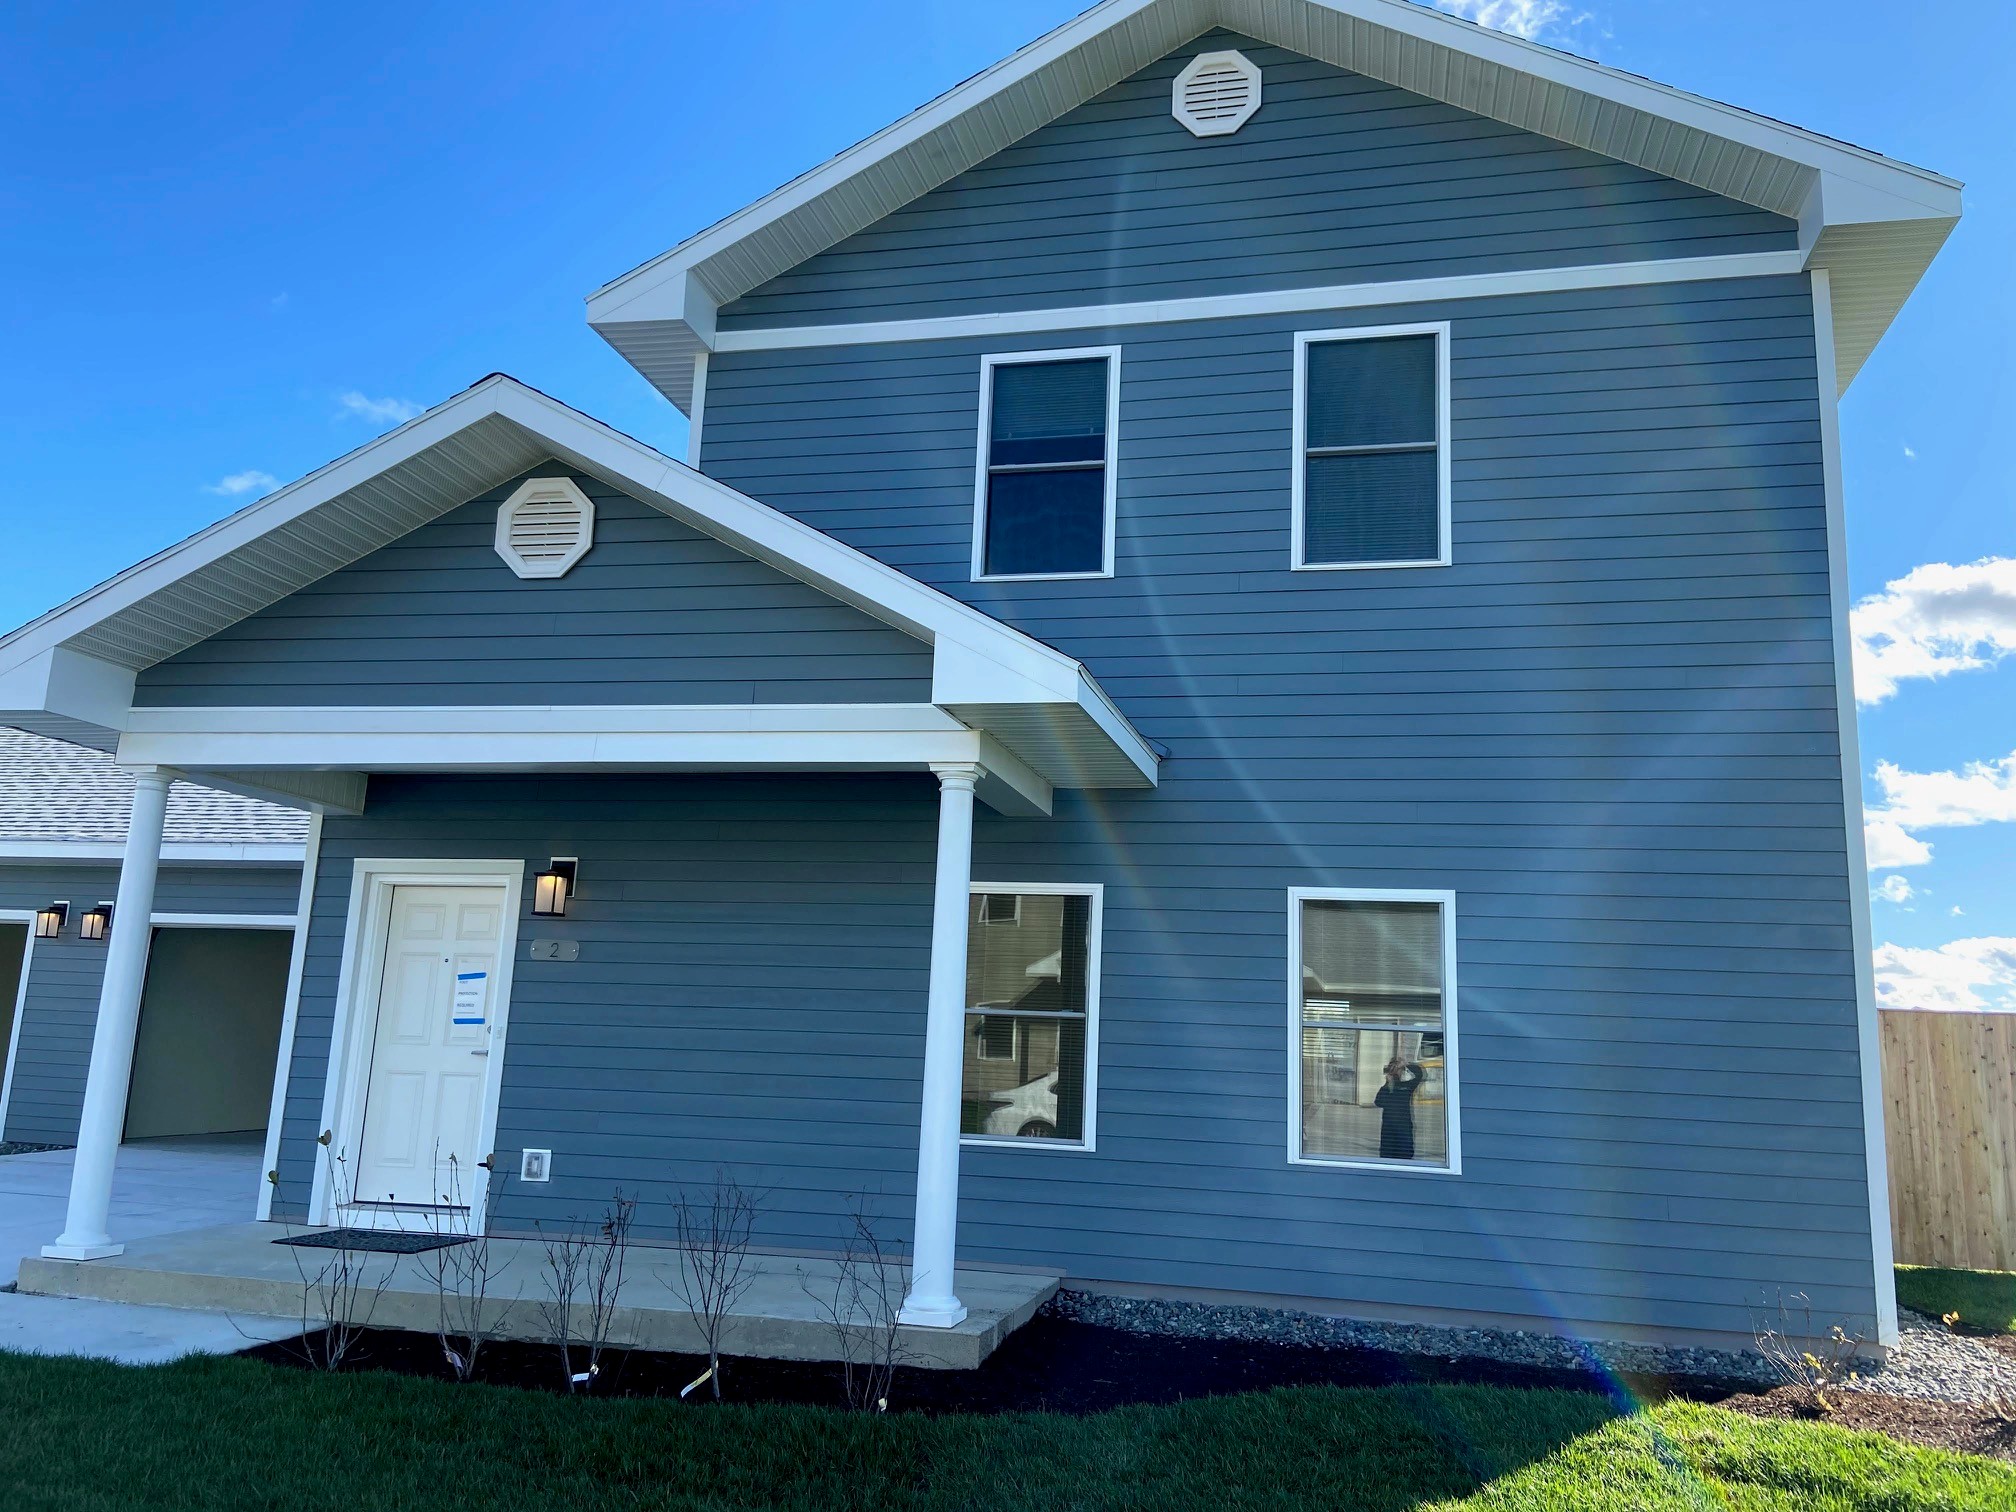 One of 12 new housing units at USCG Station Jonesport, where the Coast Guard station is the centerpost of a small fishing village in rural "down East" Maine.